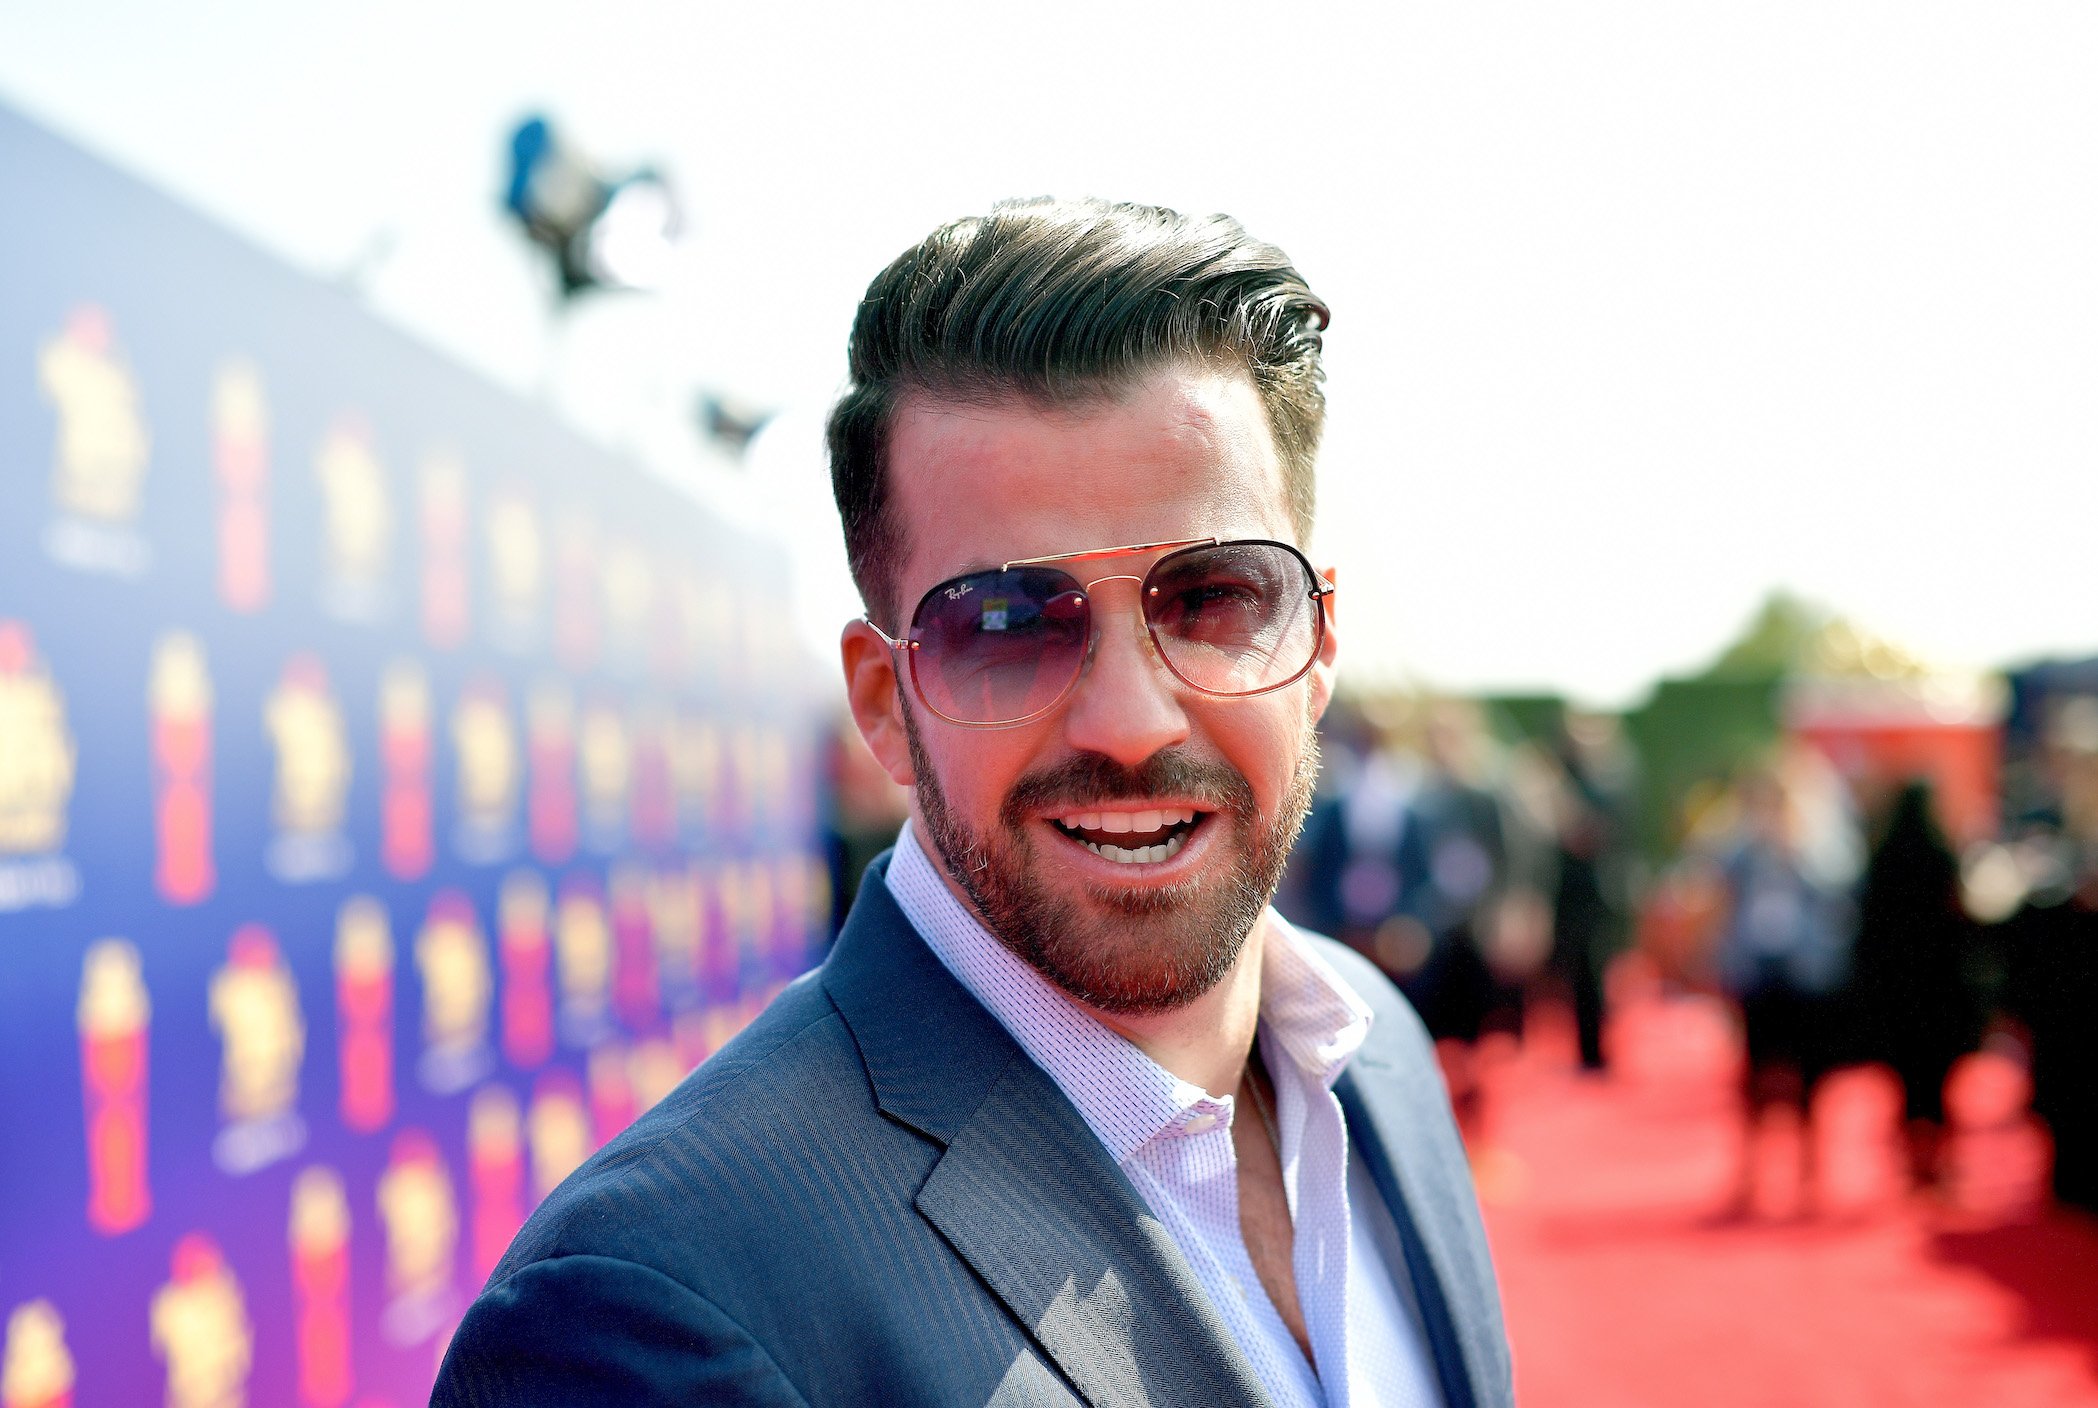 Johnny 'Bananas' Devenanzio from MTV's 'The Challenge' in sunglasses looking at the camera while attending the 2019 MTV Movie and TV Awards